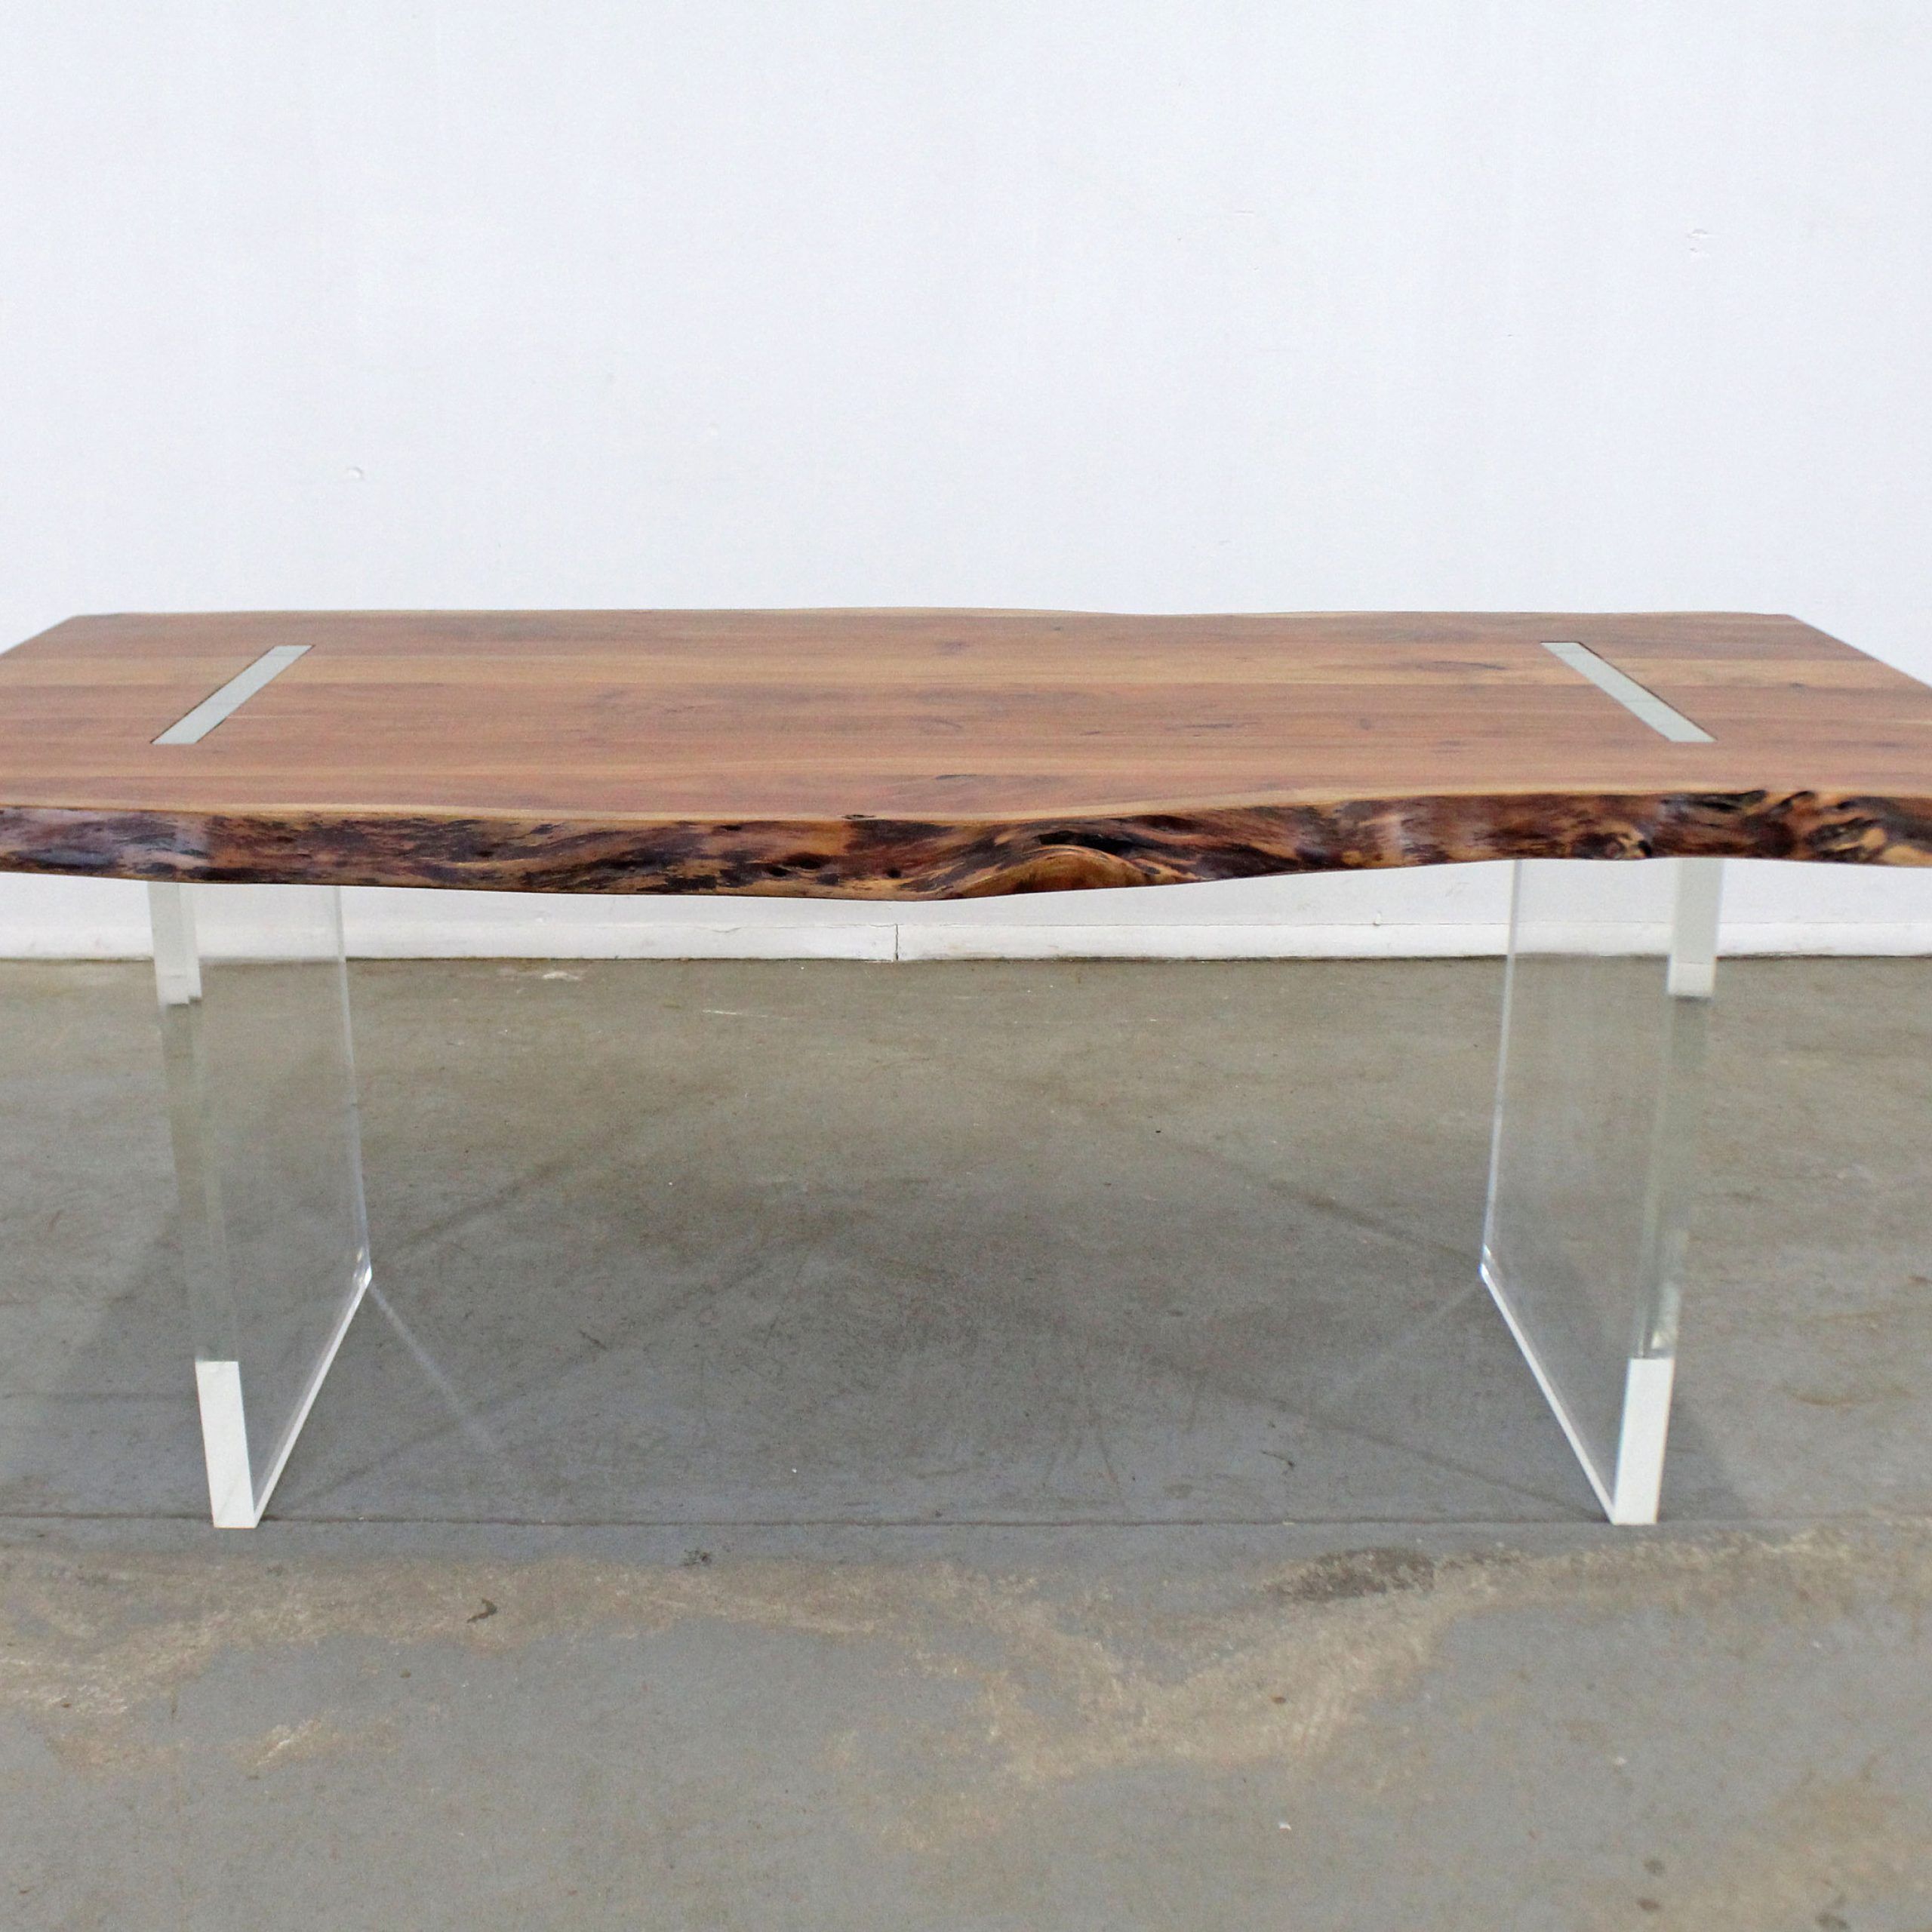 Trendy Acacia Top Dining Tables With Metal Legs Inside Modern Dining Table Floating Top Acacia Wood Lucite Base (View 25 of 30)